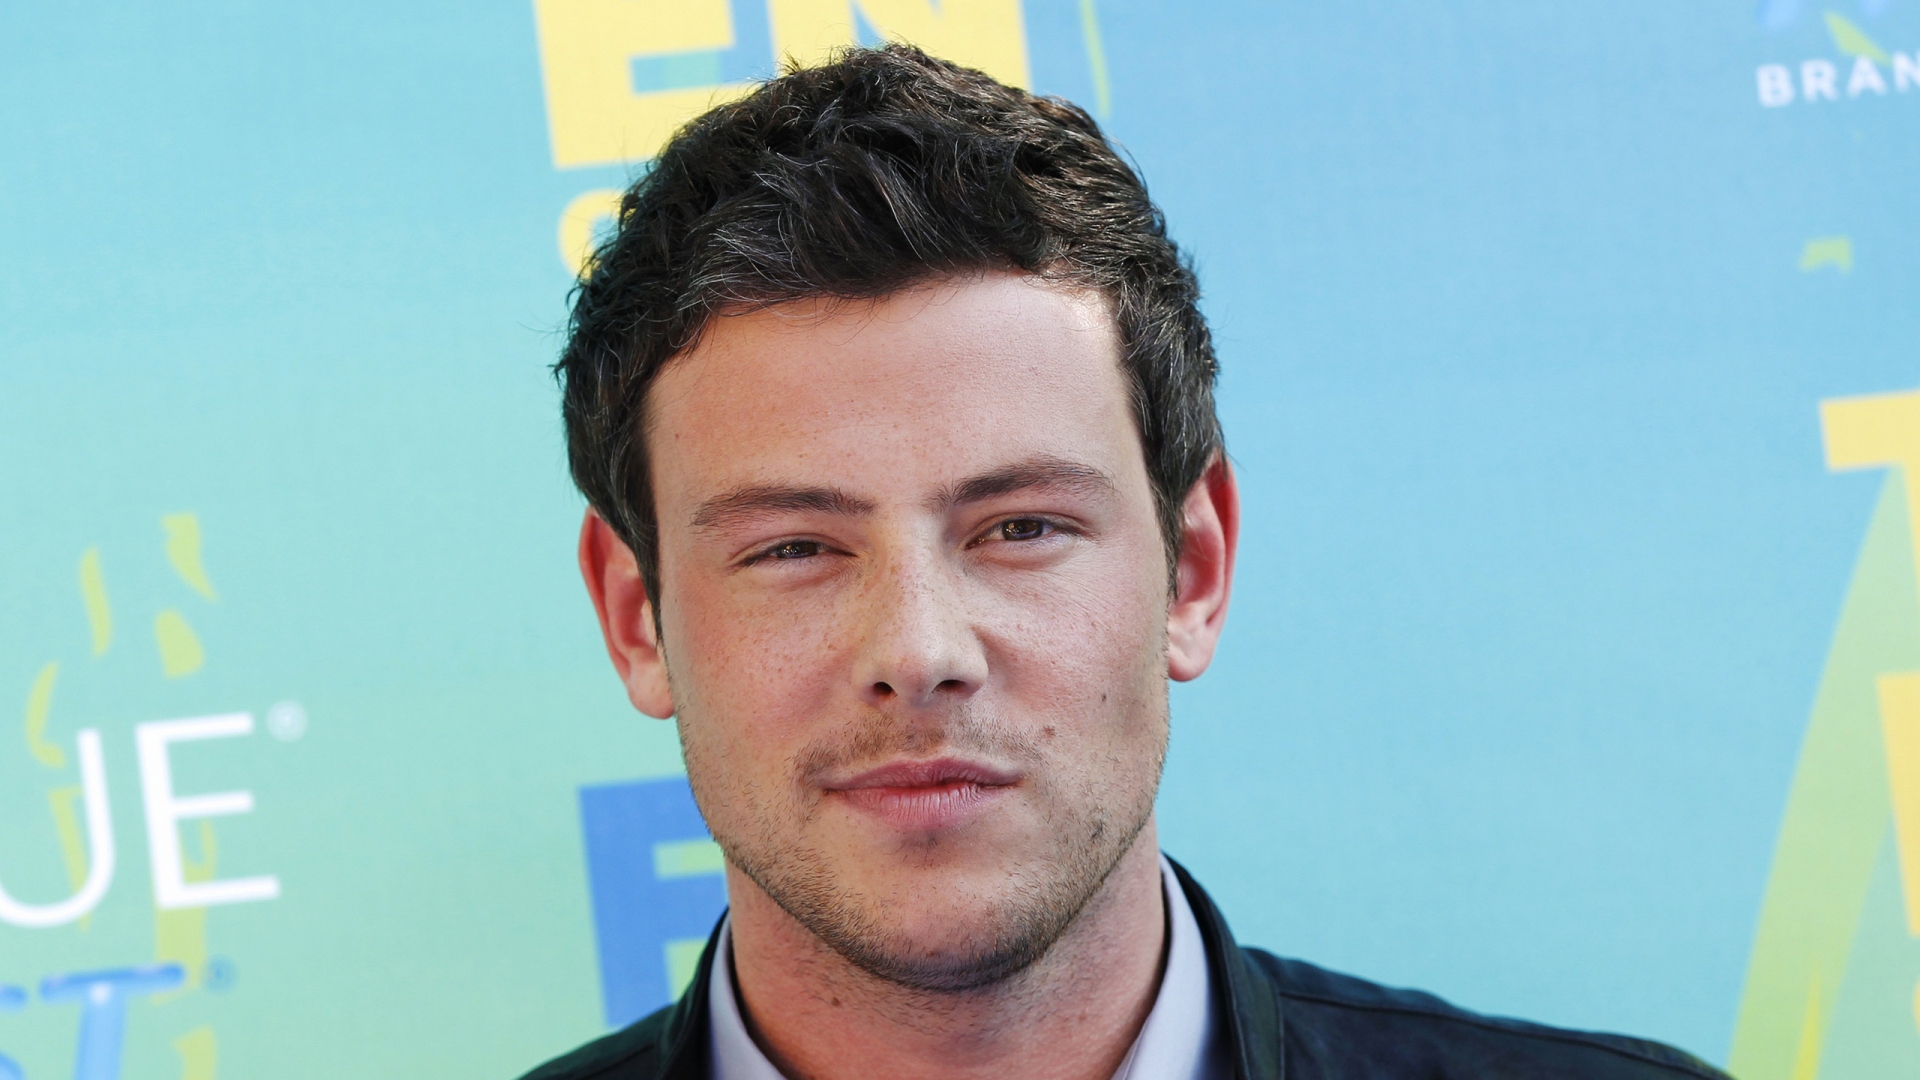 Cory Monteith for 1920 x 1080 HDTV 1080p resolution